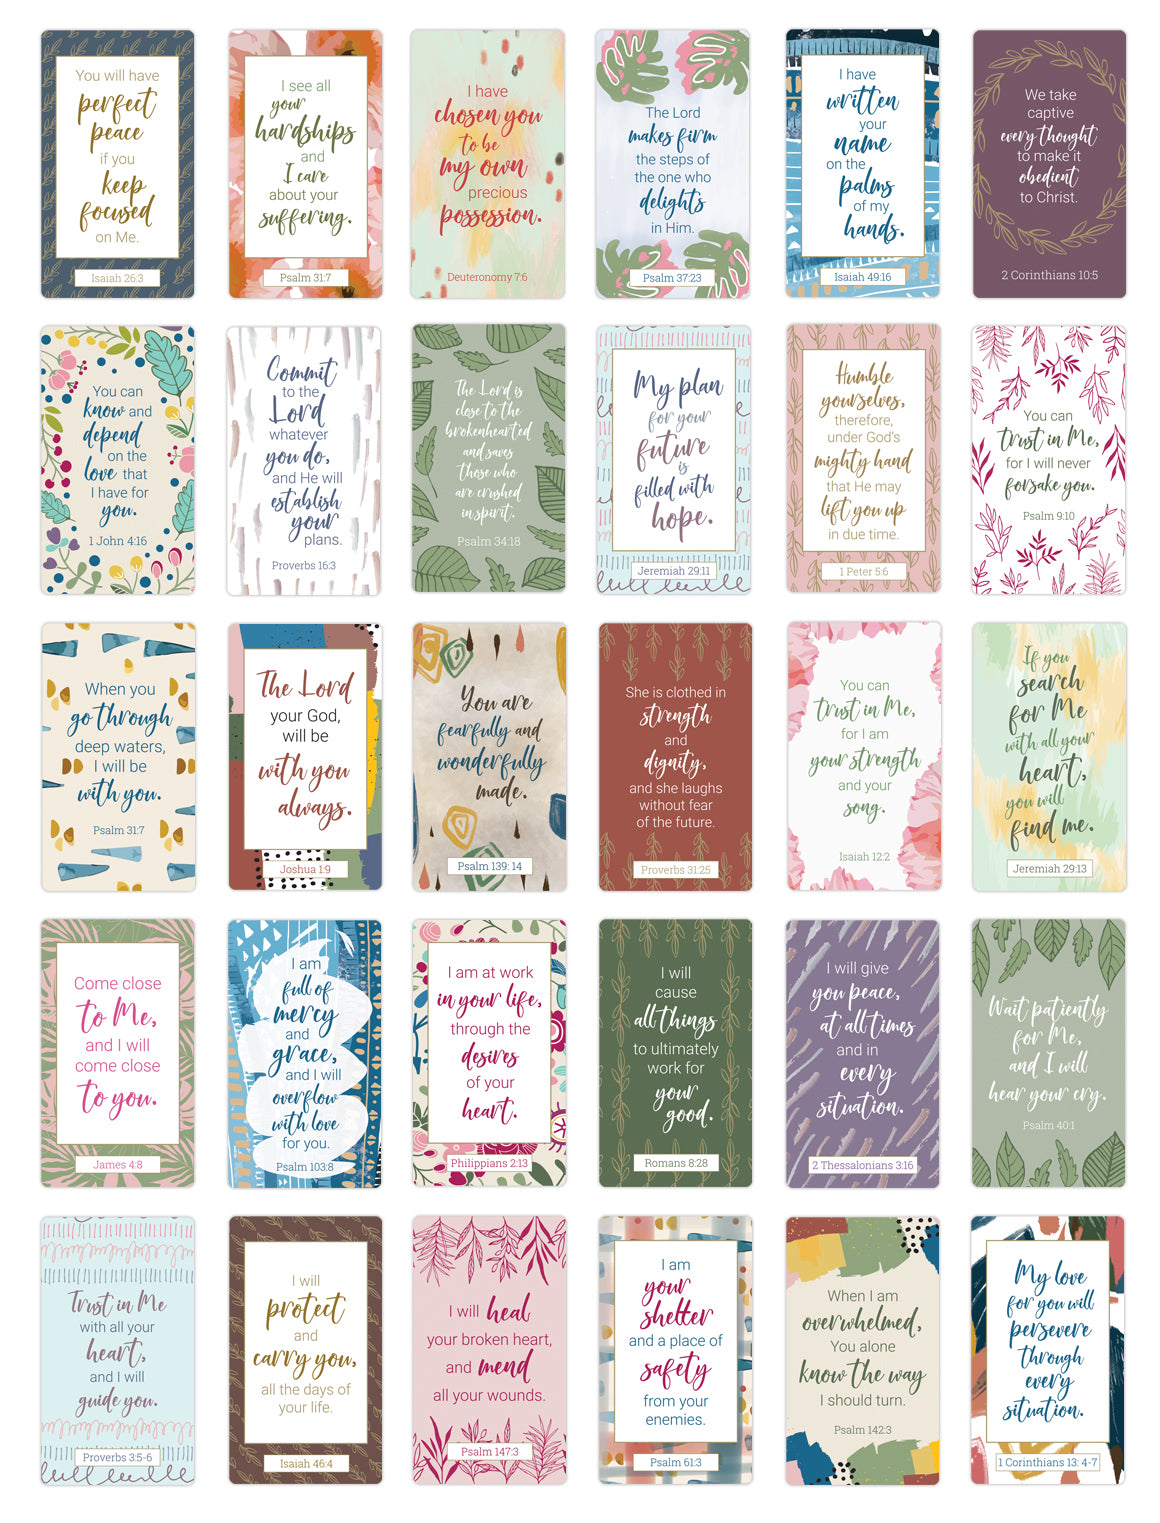 Card Deck, Prayer Cards - 30 Inspirational Cards - bloom daily planners